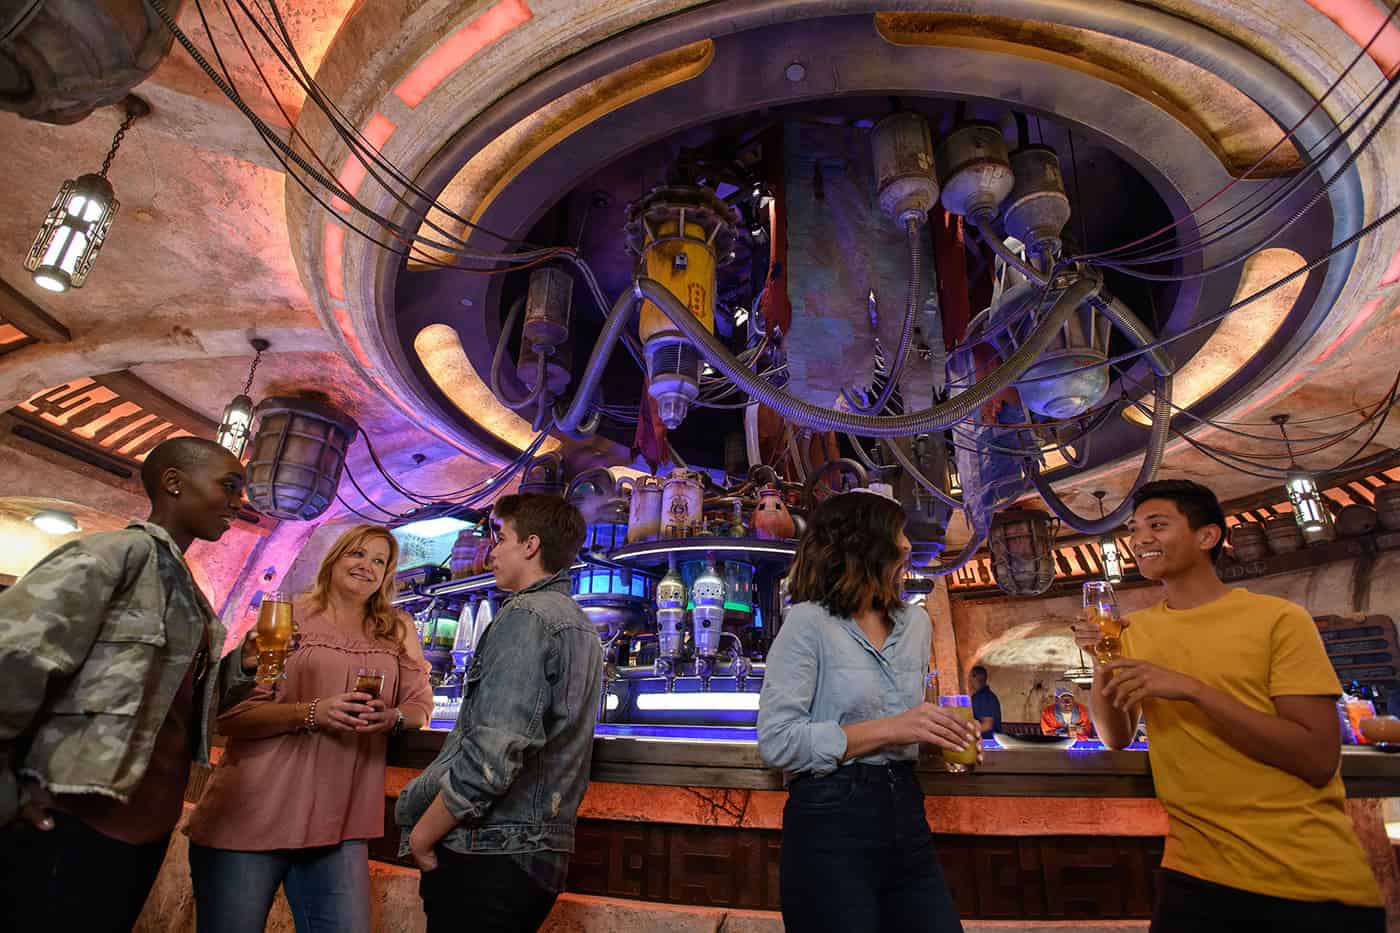 A few adults hanging out in Oga's Cantina in Star Wars Land